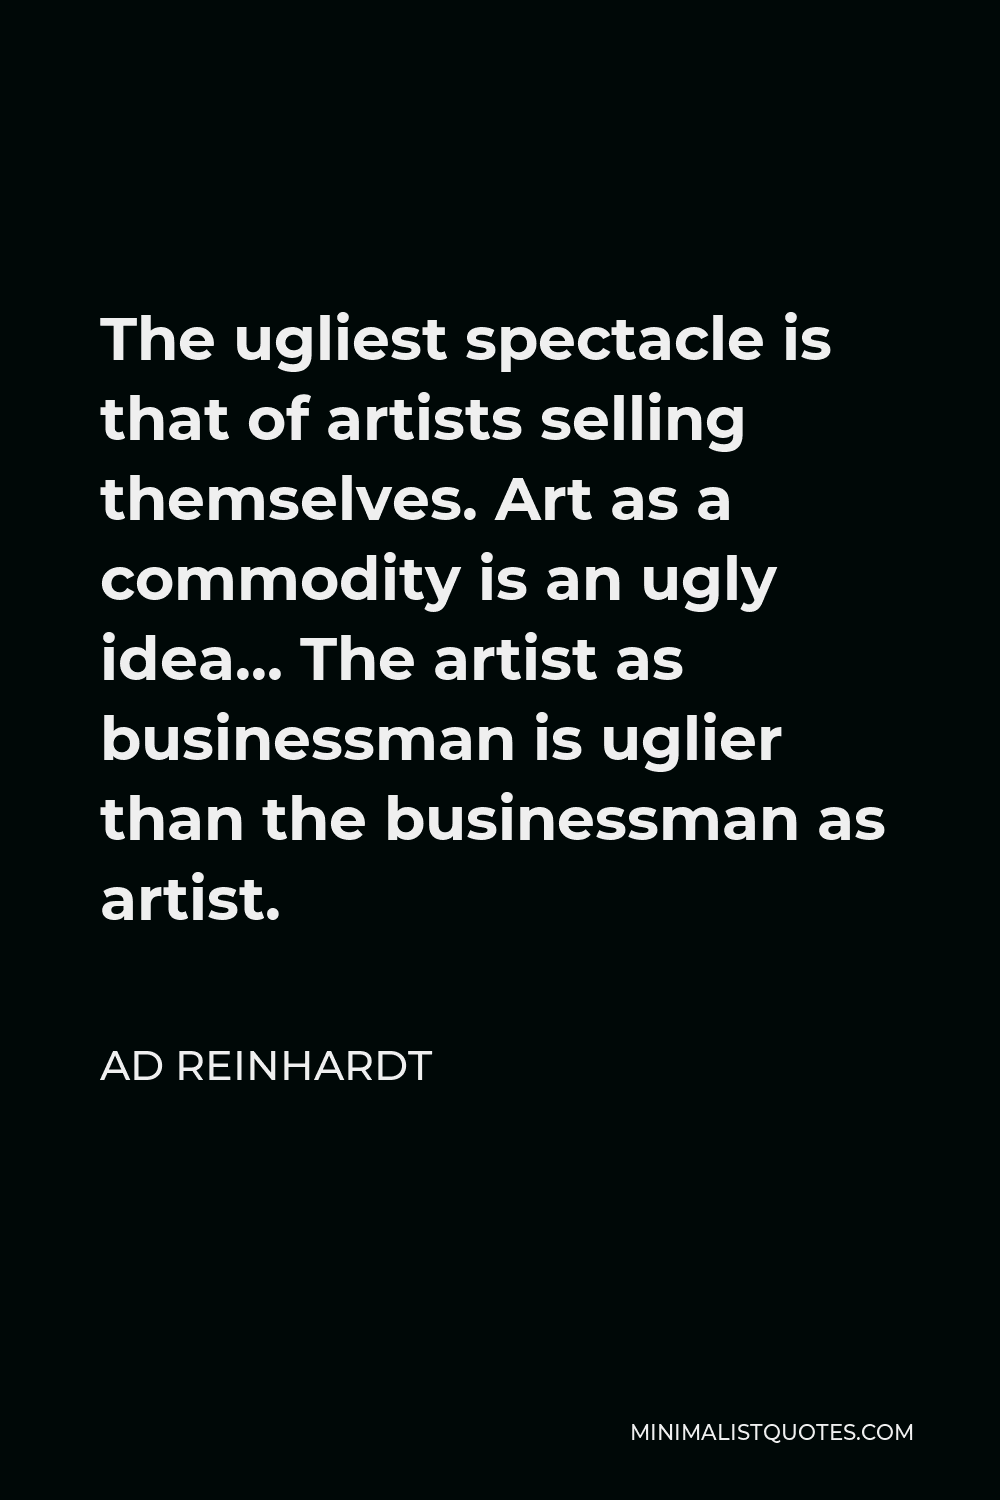 Ad Reinhardt Quote - The ugliest spectacle is that of artists selling themselves. Art as a commodity is an ugly idea… The artist as businessman is uglier than the businessman as artist.